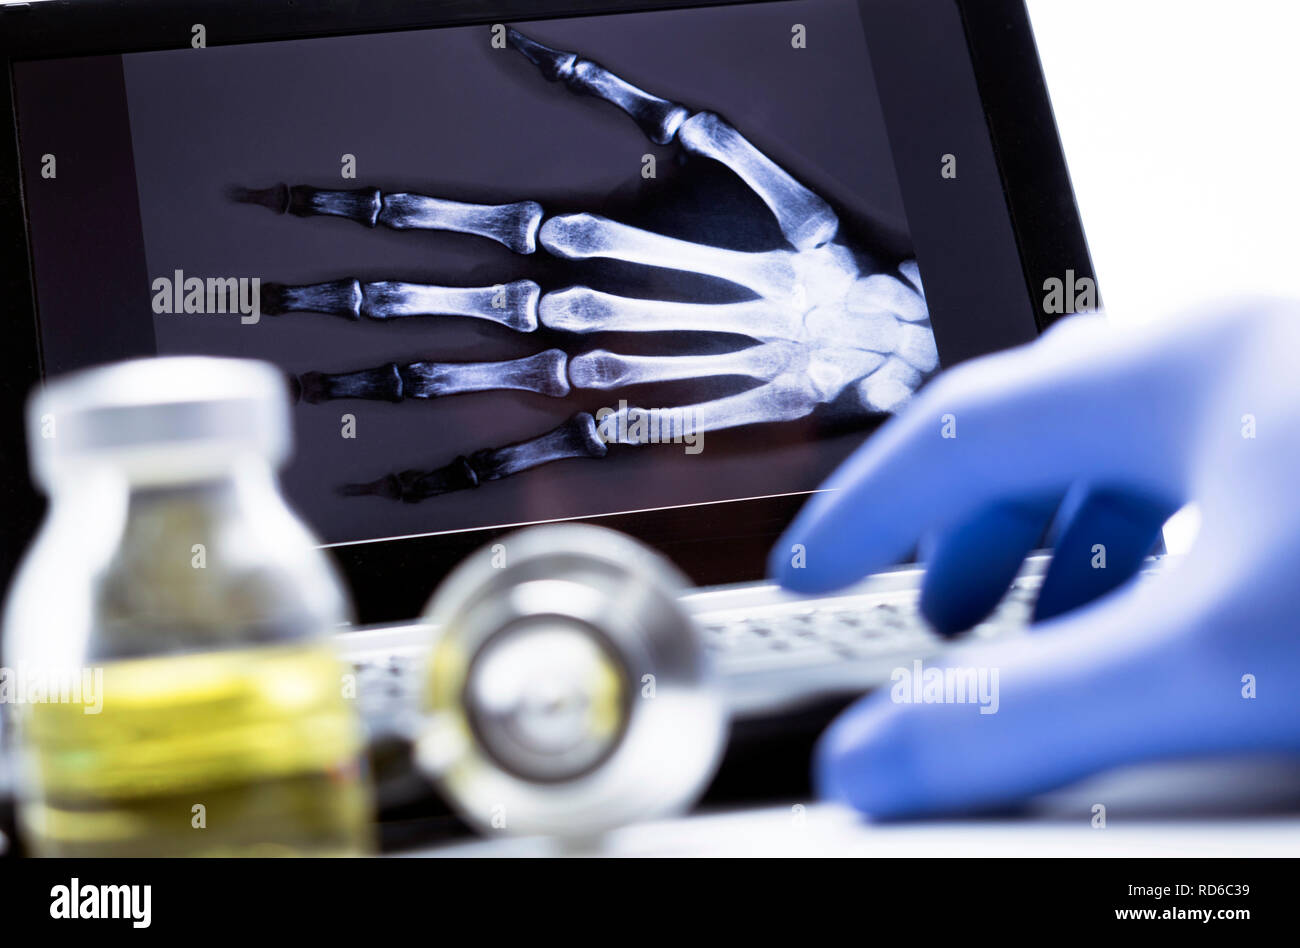 Hand radiography in hospital, conceptual image Stock Photo